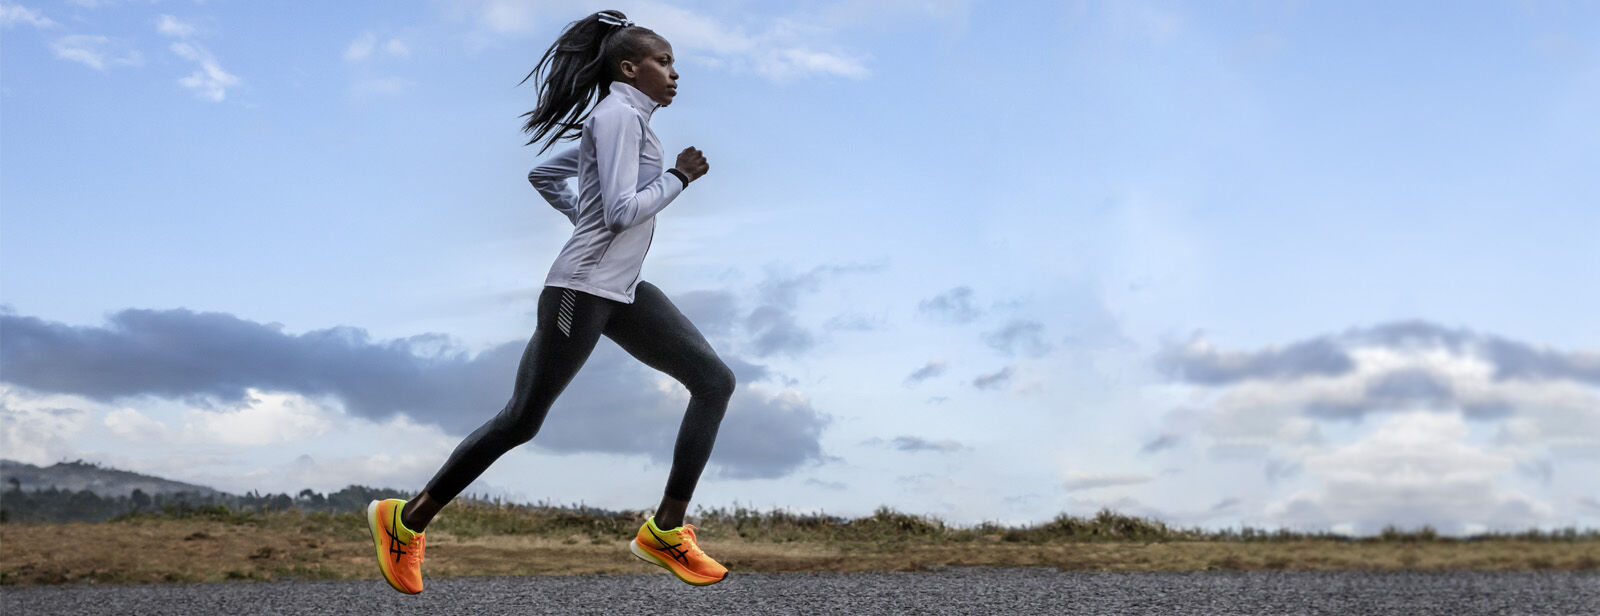 How to Increase Your Running Speed | ASICS